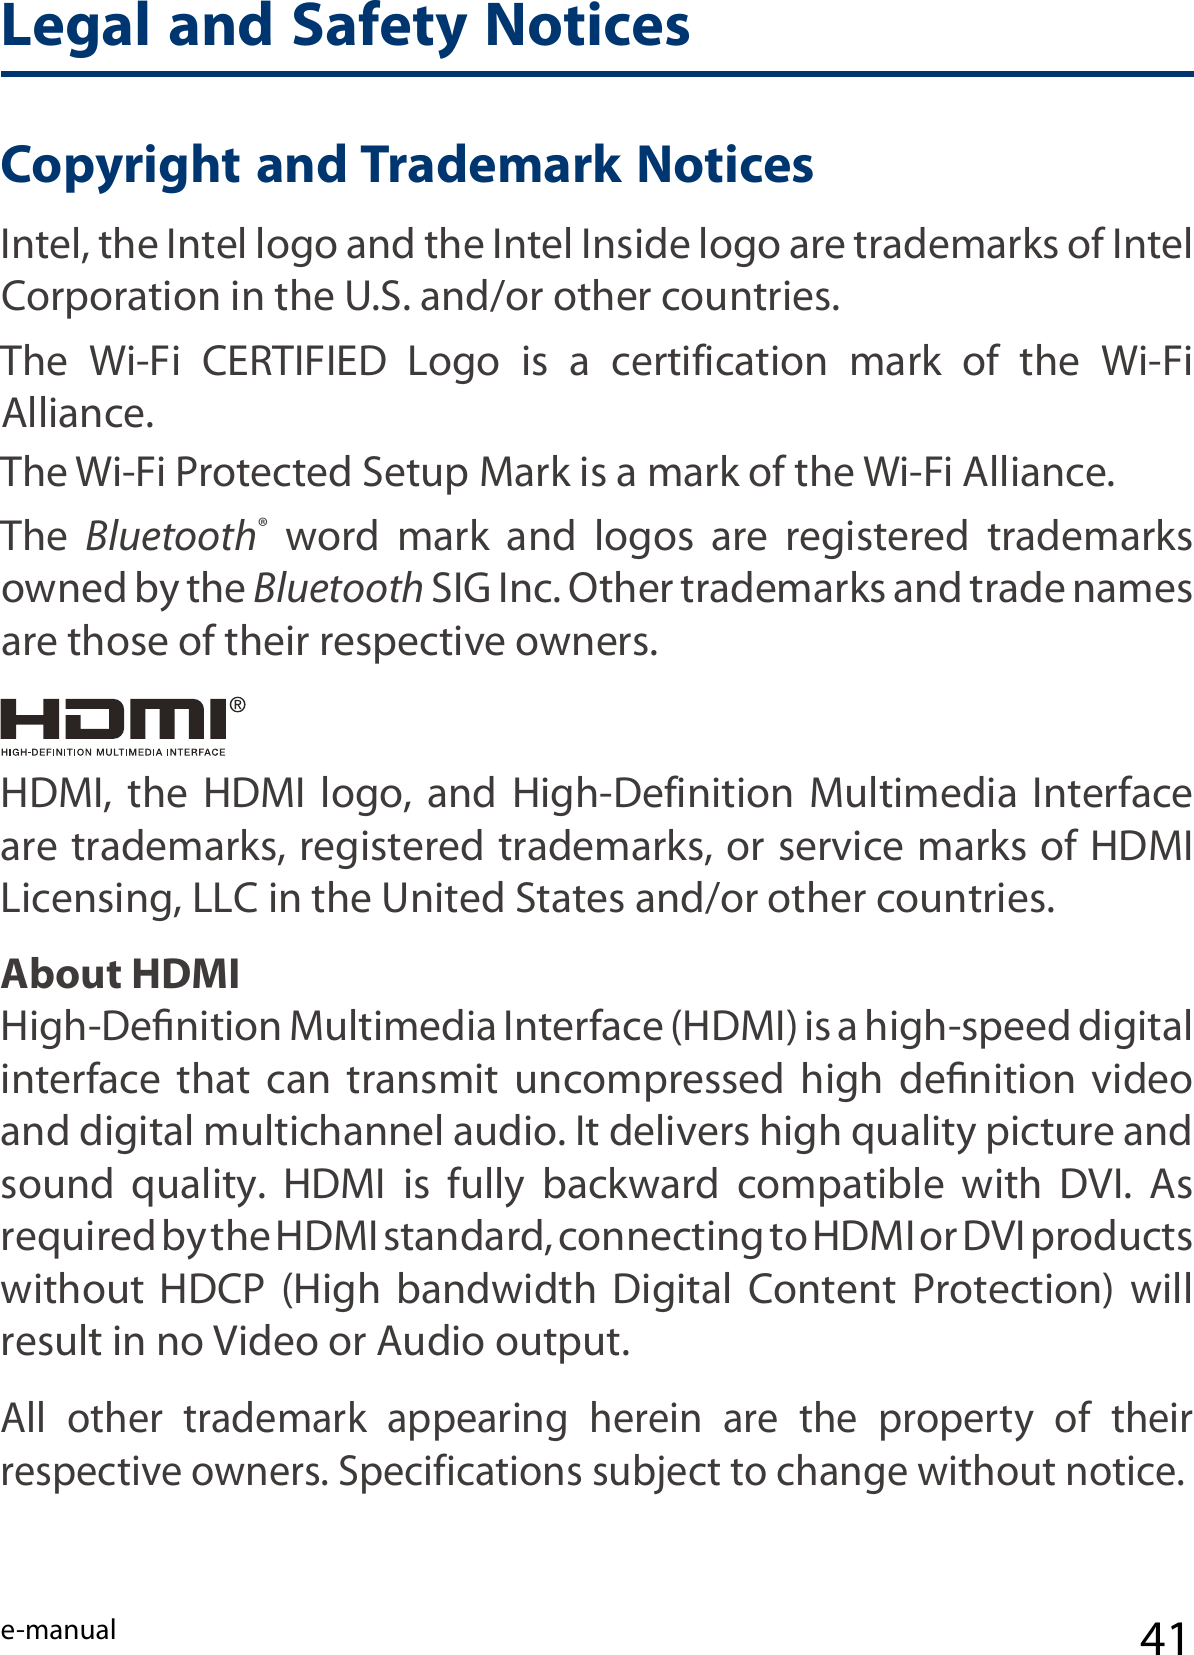 e-manual 41Legal and Safety NoticesCopyright and Trademark Notices    Intel, the Intel logo and the Intel Inside logo are trademarks of Intel Corporation in the U.S. and/or other countries.The  Wi-Fi  CERTIFIED  Logo  is  a  certification  mark  of  the  Wi-Fi Alliance. The Wi-Fi Protected Setup Mark is a mark of the Wi-Fi Alliance.The  Bluetooth®  word  mark  and  logos  are  registered  trademarks owned by the Bluetooth SIG Inc. Other trademarks and trade names are those of their respective owners.About HDMIHigh-Deﬁnition Multimedia Interface (HDMI) is a high-speed digital interface  that  can  transmit  uncompressed  high  deﬁnition  video and digital multichannel audio. It delivers high quality picture and sound  quality.  HDMI  is  fully  backward  compatible  with  DVI.  As required by the HDMI standard, connecting to HDMI or DVI products without  HDCP  (High  bandwidth  Digital  Content  Protection)  will result in no Video or Audio output.HDMI,  the  HDMI  logo,  and  High-Definition  Multimedia  Interface are trademarks, registered trademarks, or service marks of HDMI Licensing, LLC in the United States and/or other countries.All  other  trademark  appearing  herein  are  the  property  of  their respective owners. Specifications subject to change without notice.